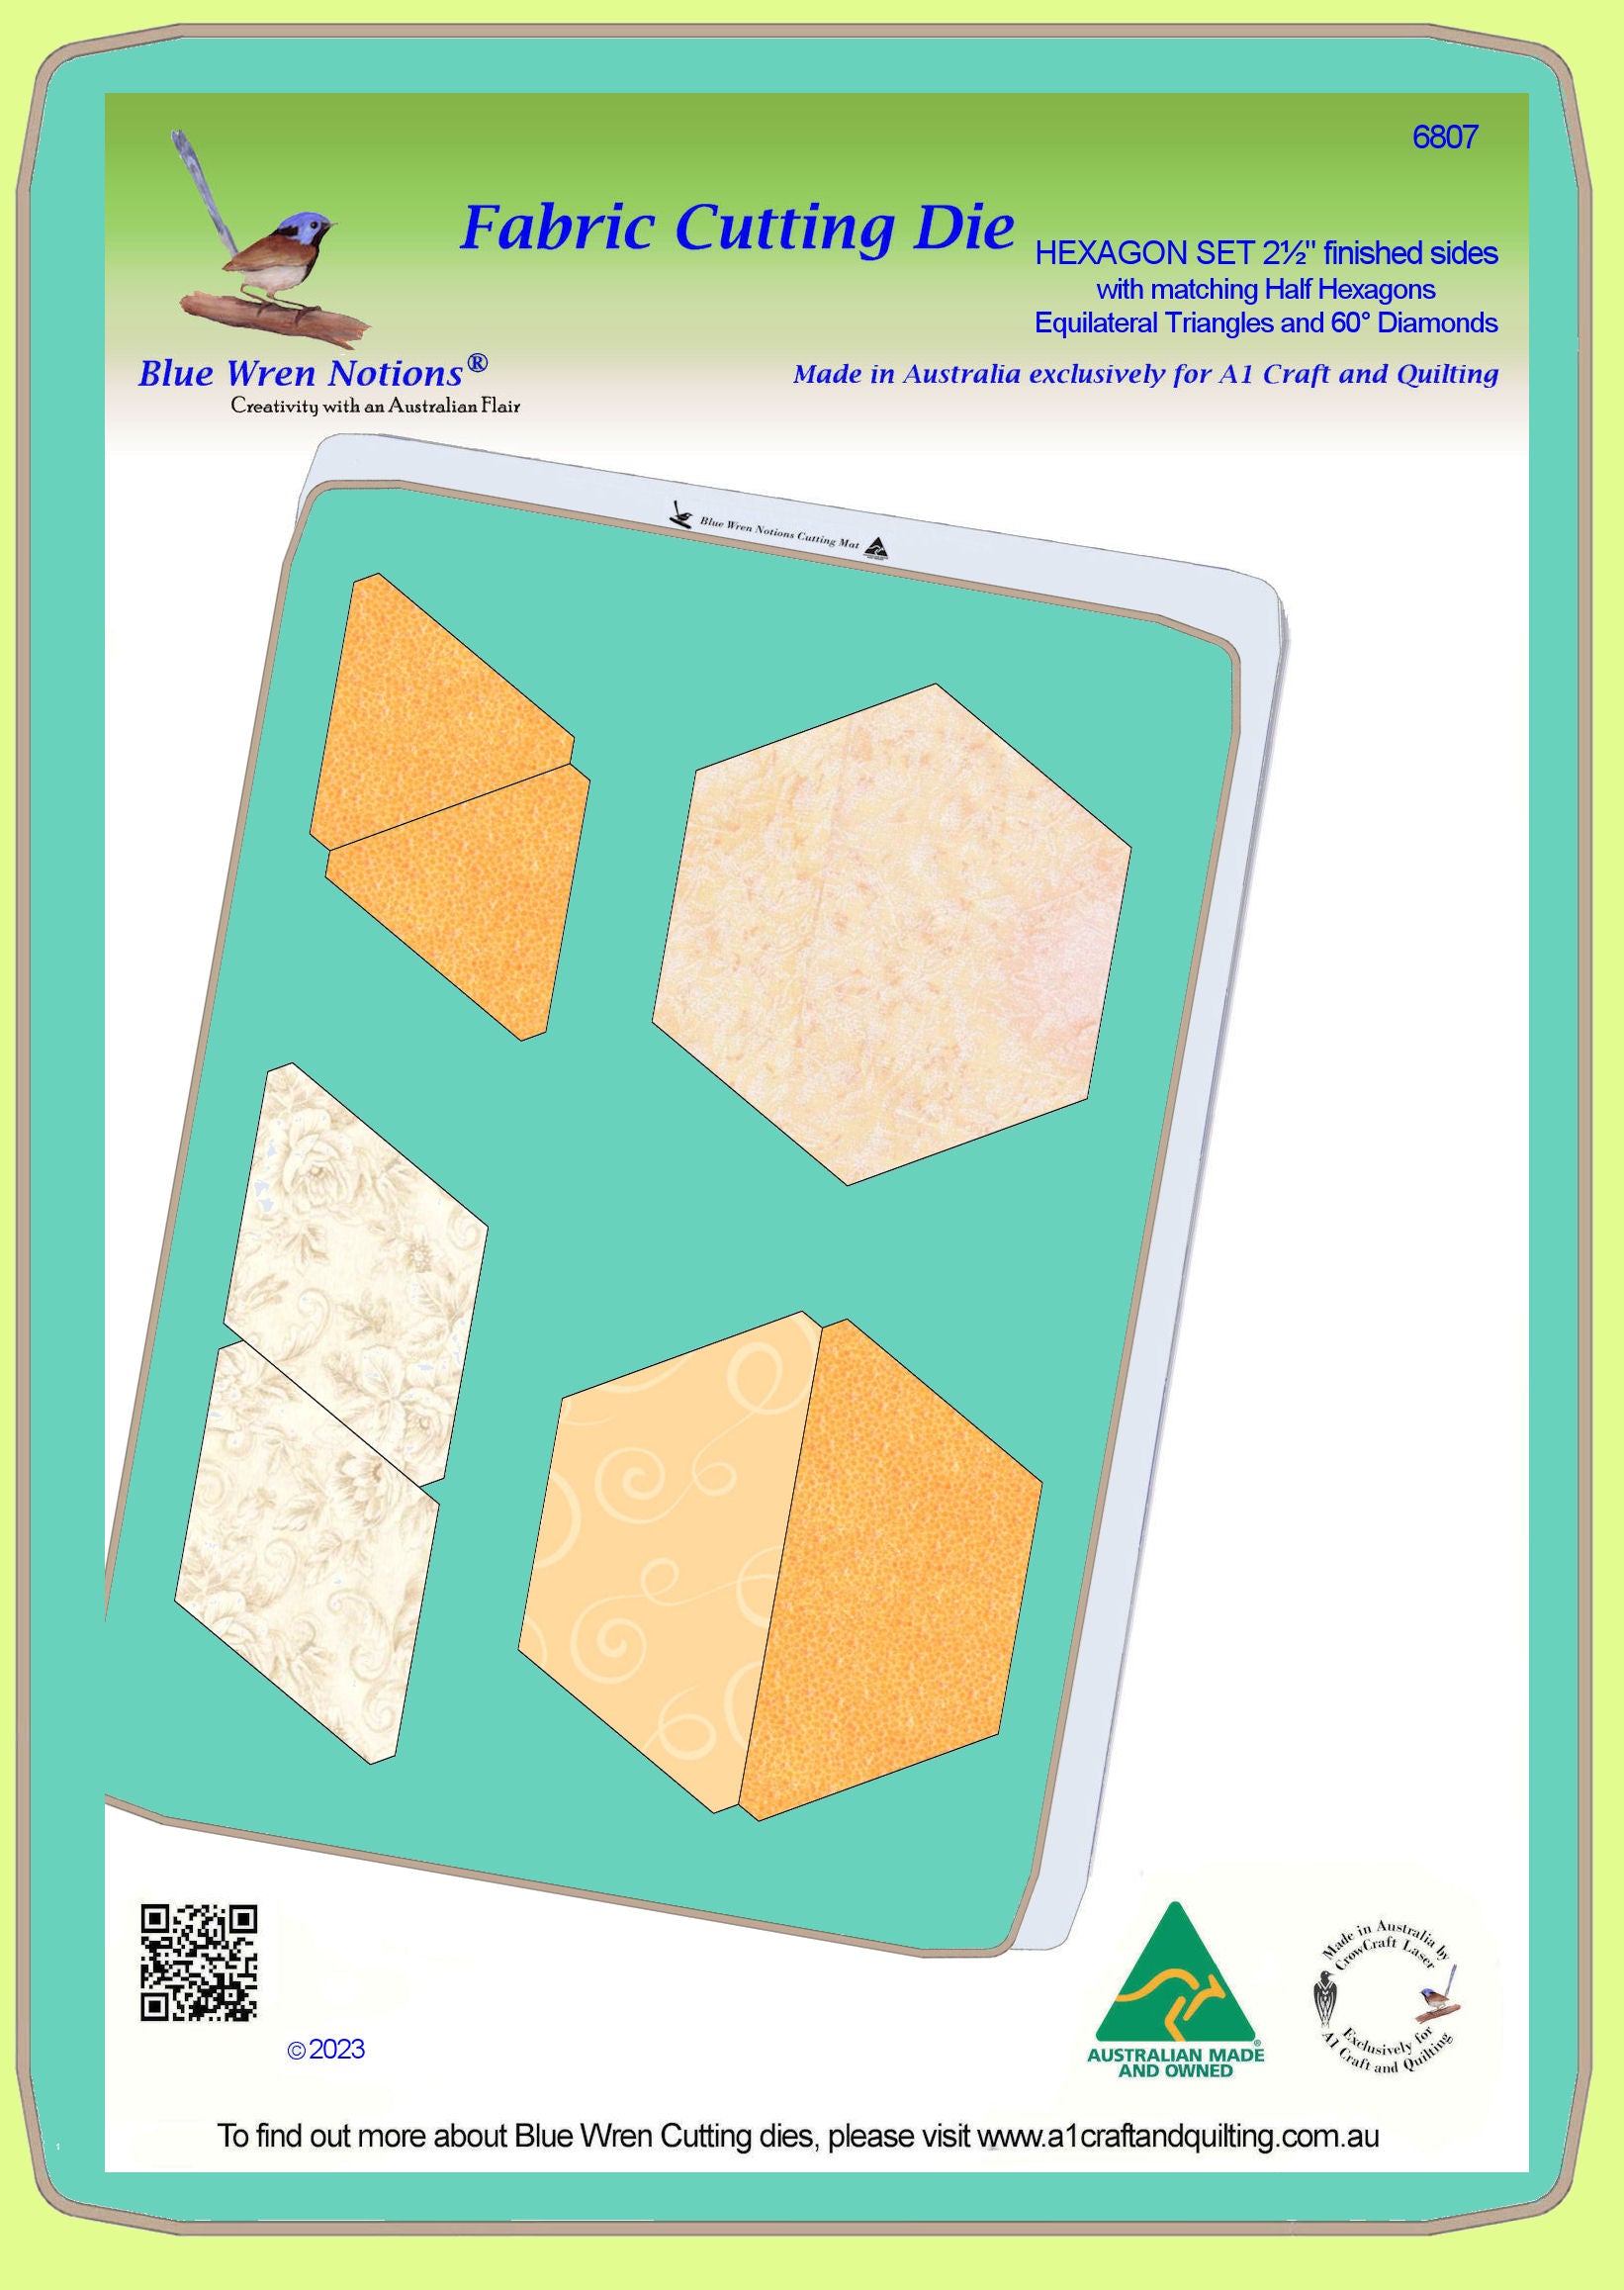 Hexagon Set 2½" finished sides, with matching half hexagons, Equilateral Triangles and 60° Diamonds - 6807 - Mat Included